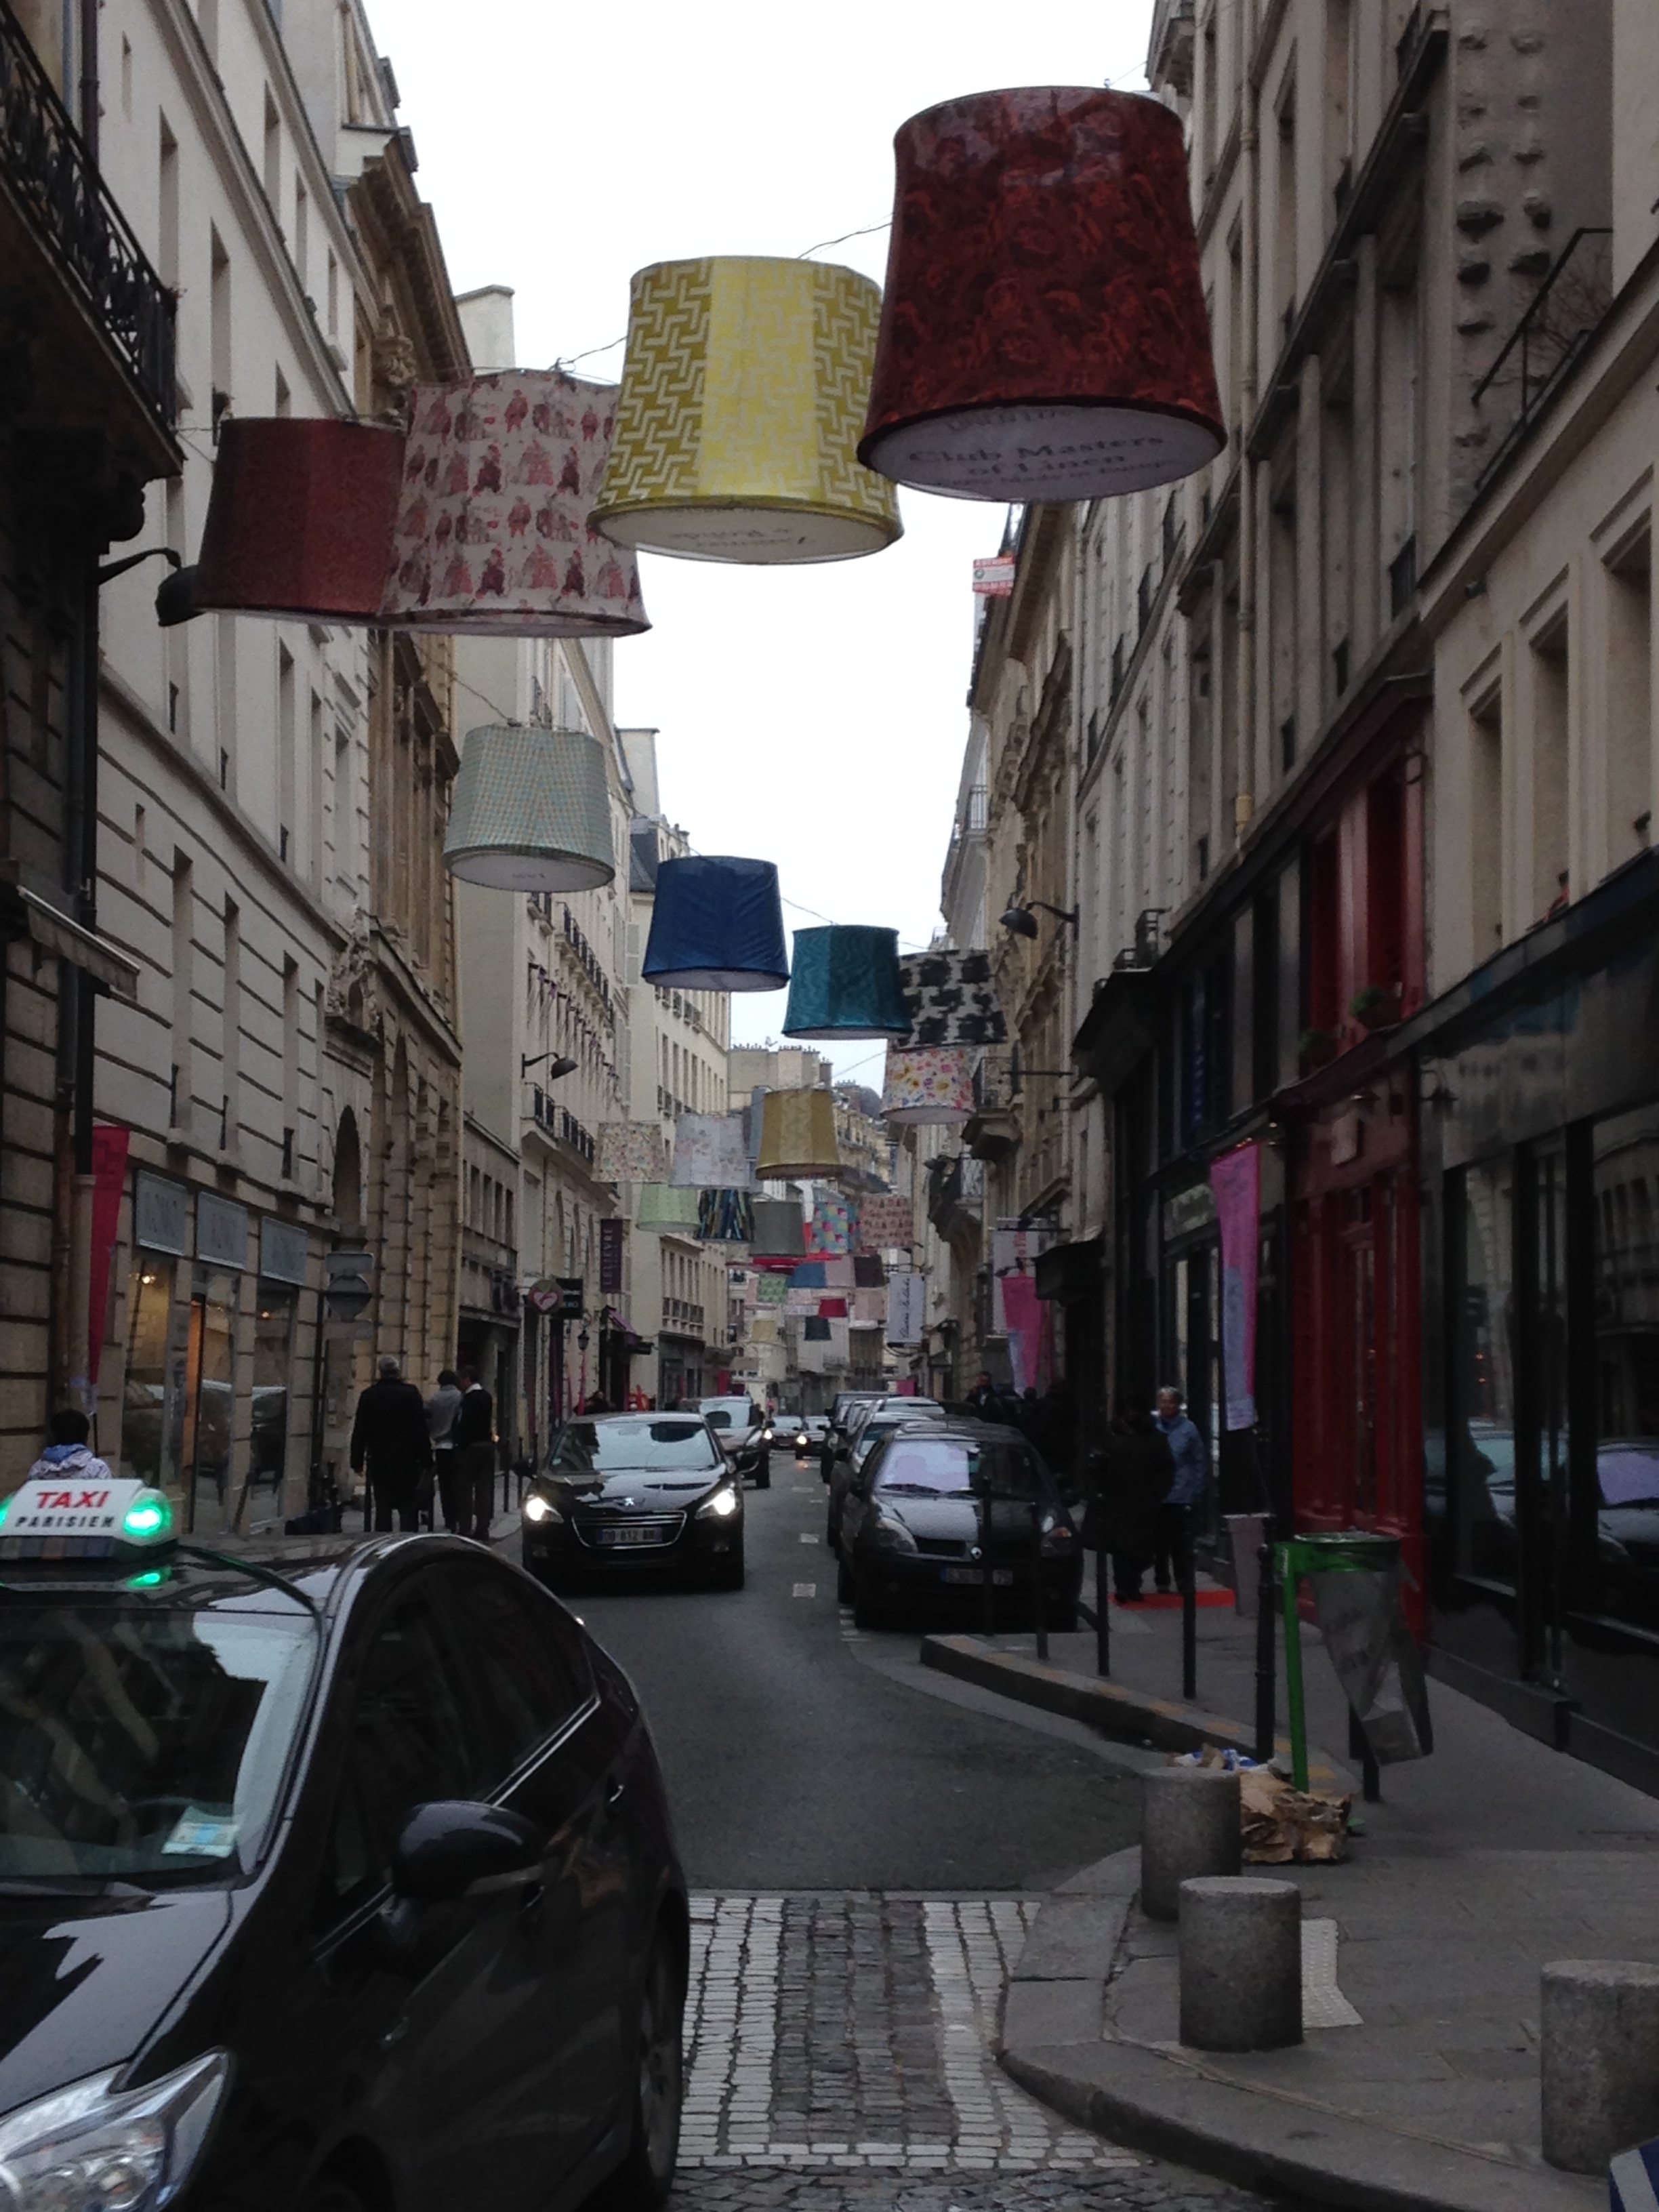 The-Rue-du-Mail-whaere-most-of-the-fabric-houses-are.jpg